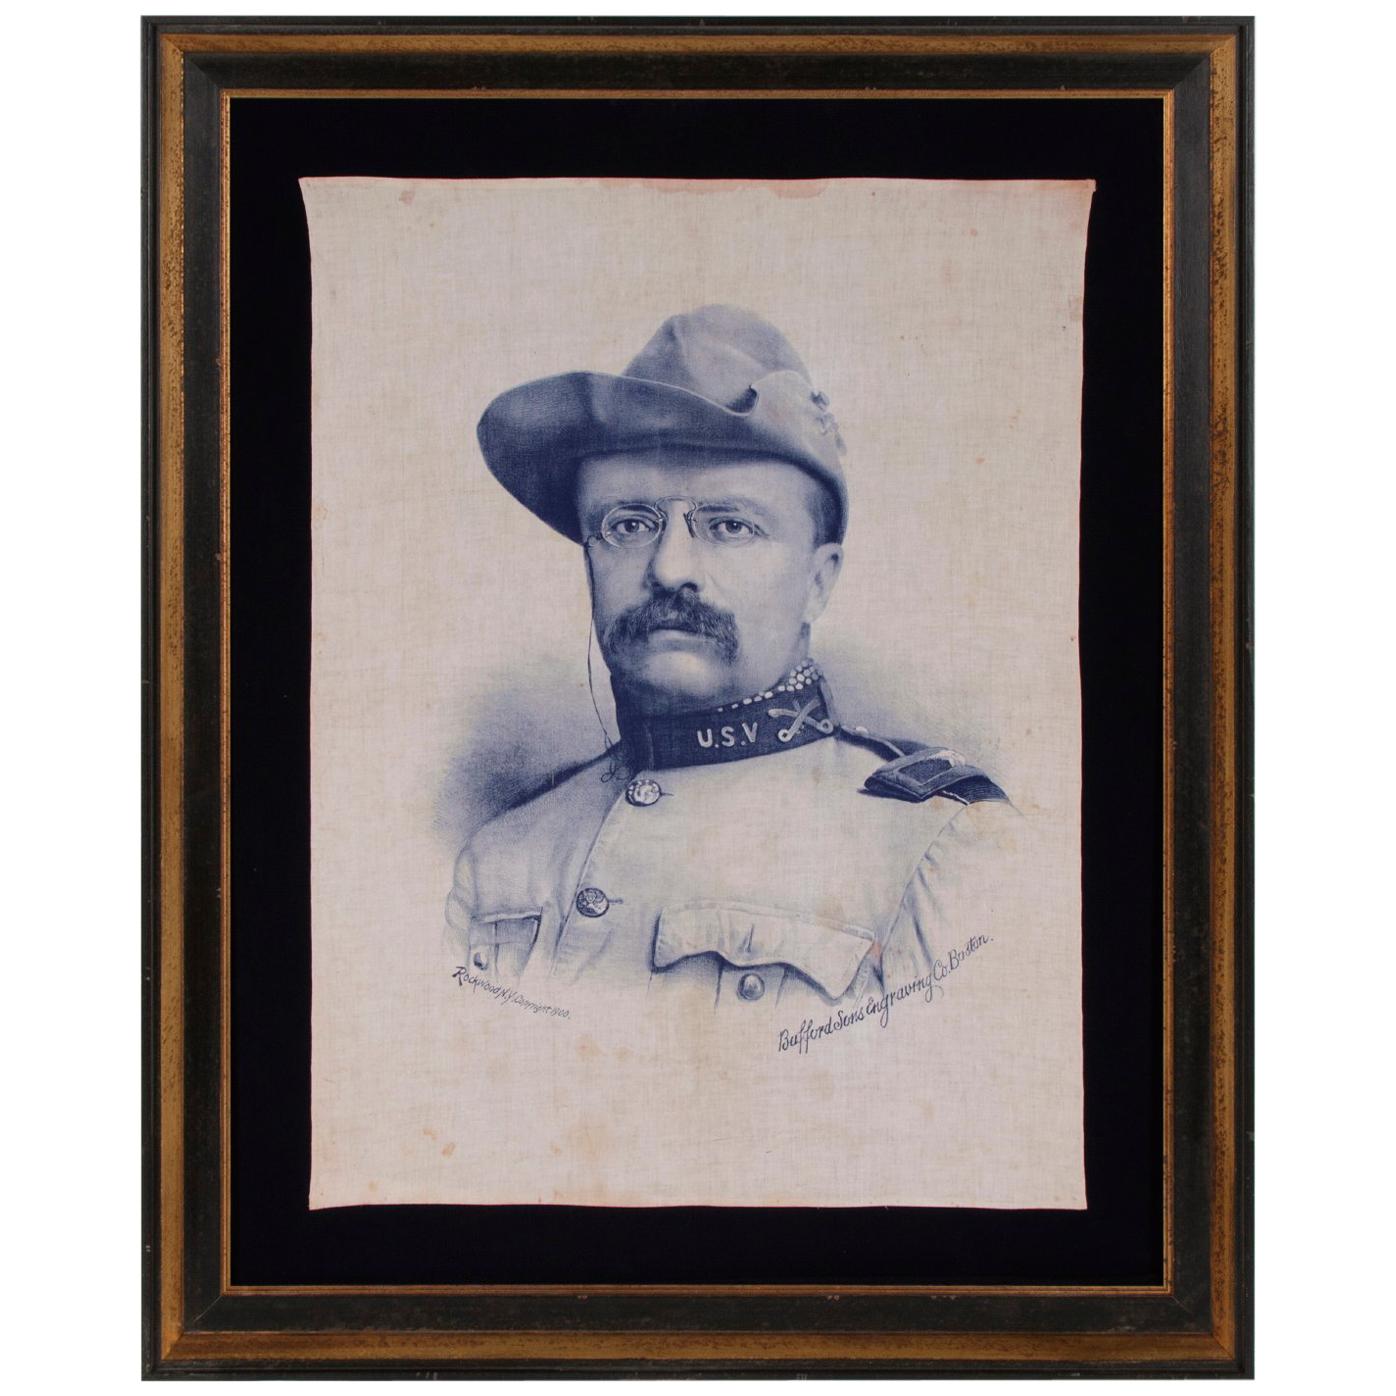 Theodore Roosevelt Banner with an Exquisite Portrait Image in Rough Rider's Garb